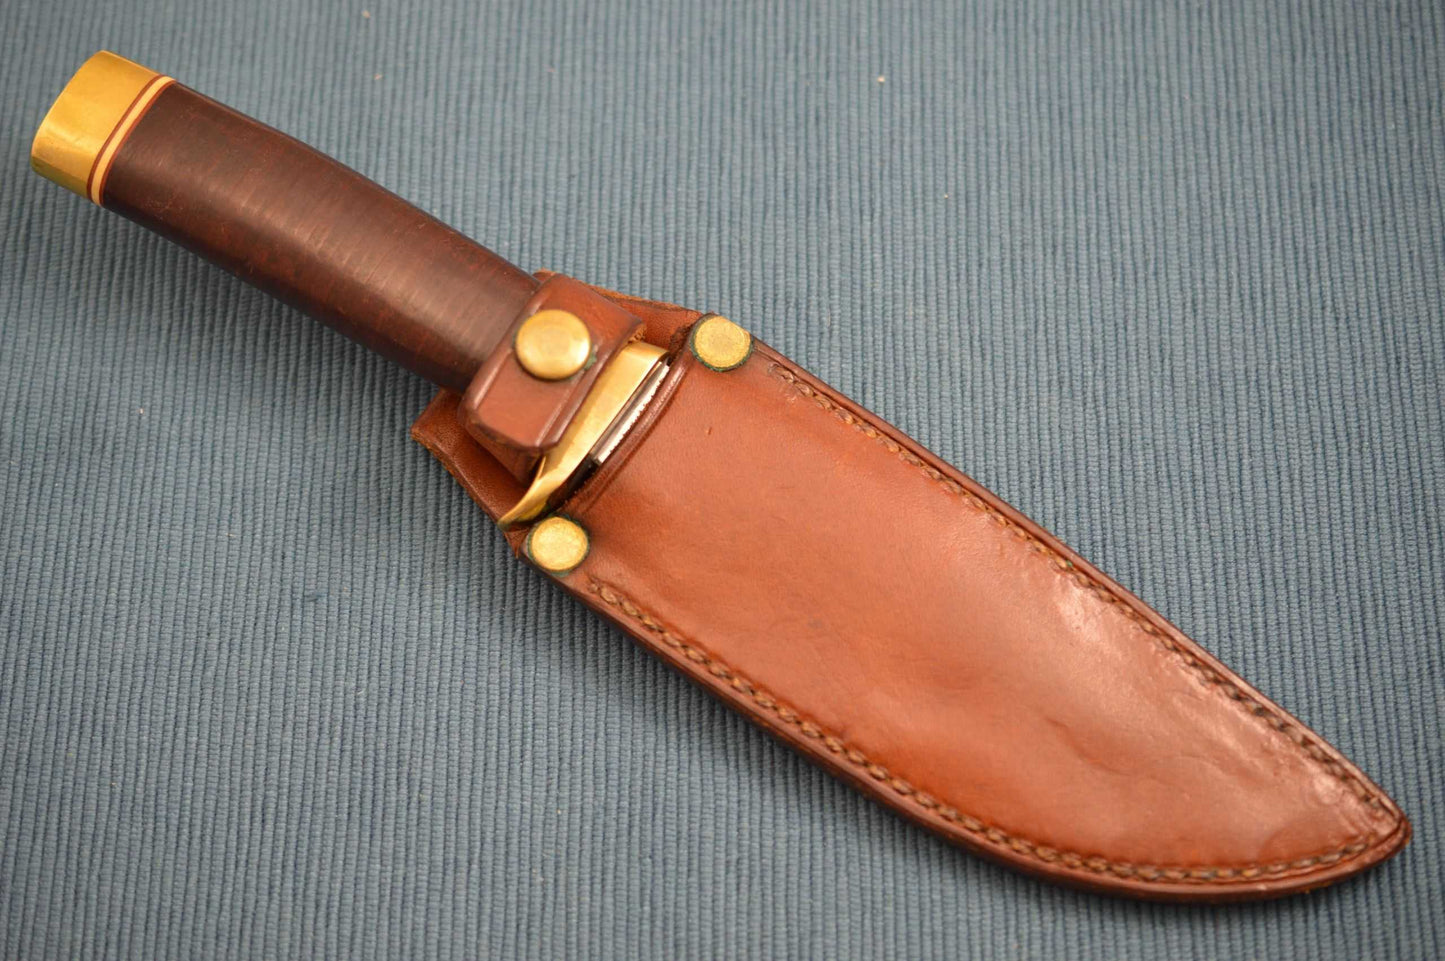 Bob Loveless Stacked Leather Delaware Maid Abercrombie & Fitch Co. Knife, Leather Sheath